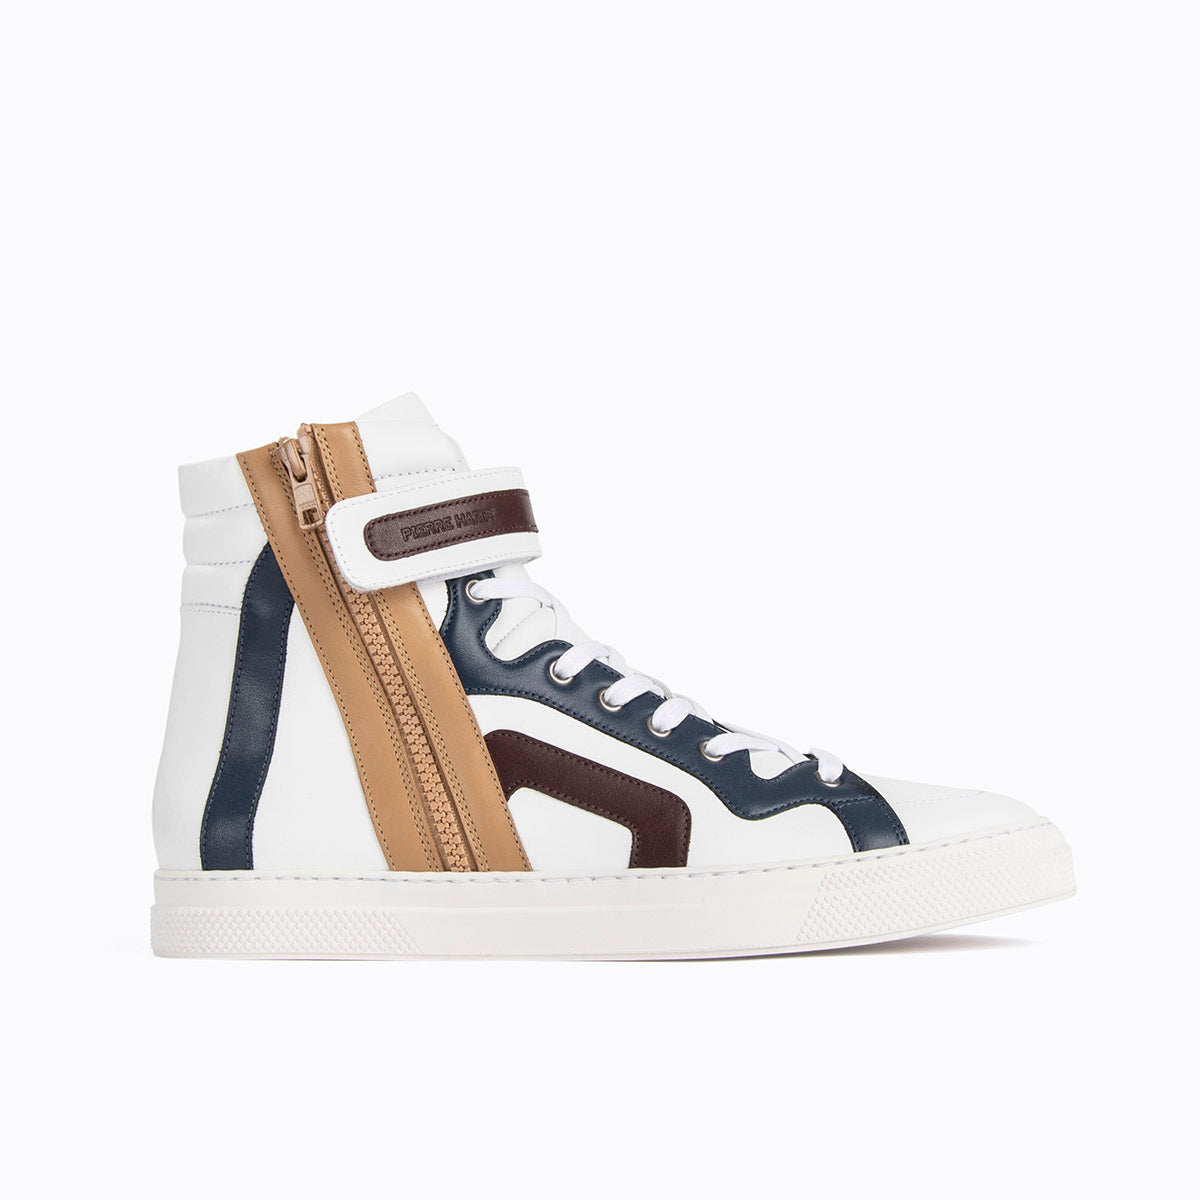 112 high-top sneakers for men in multicolore leather — PIERRE HARDY